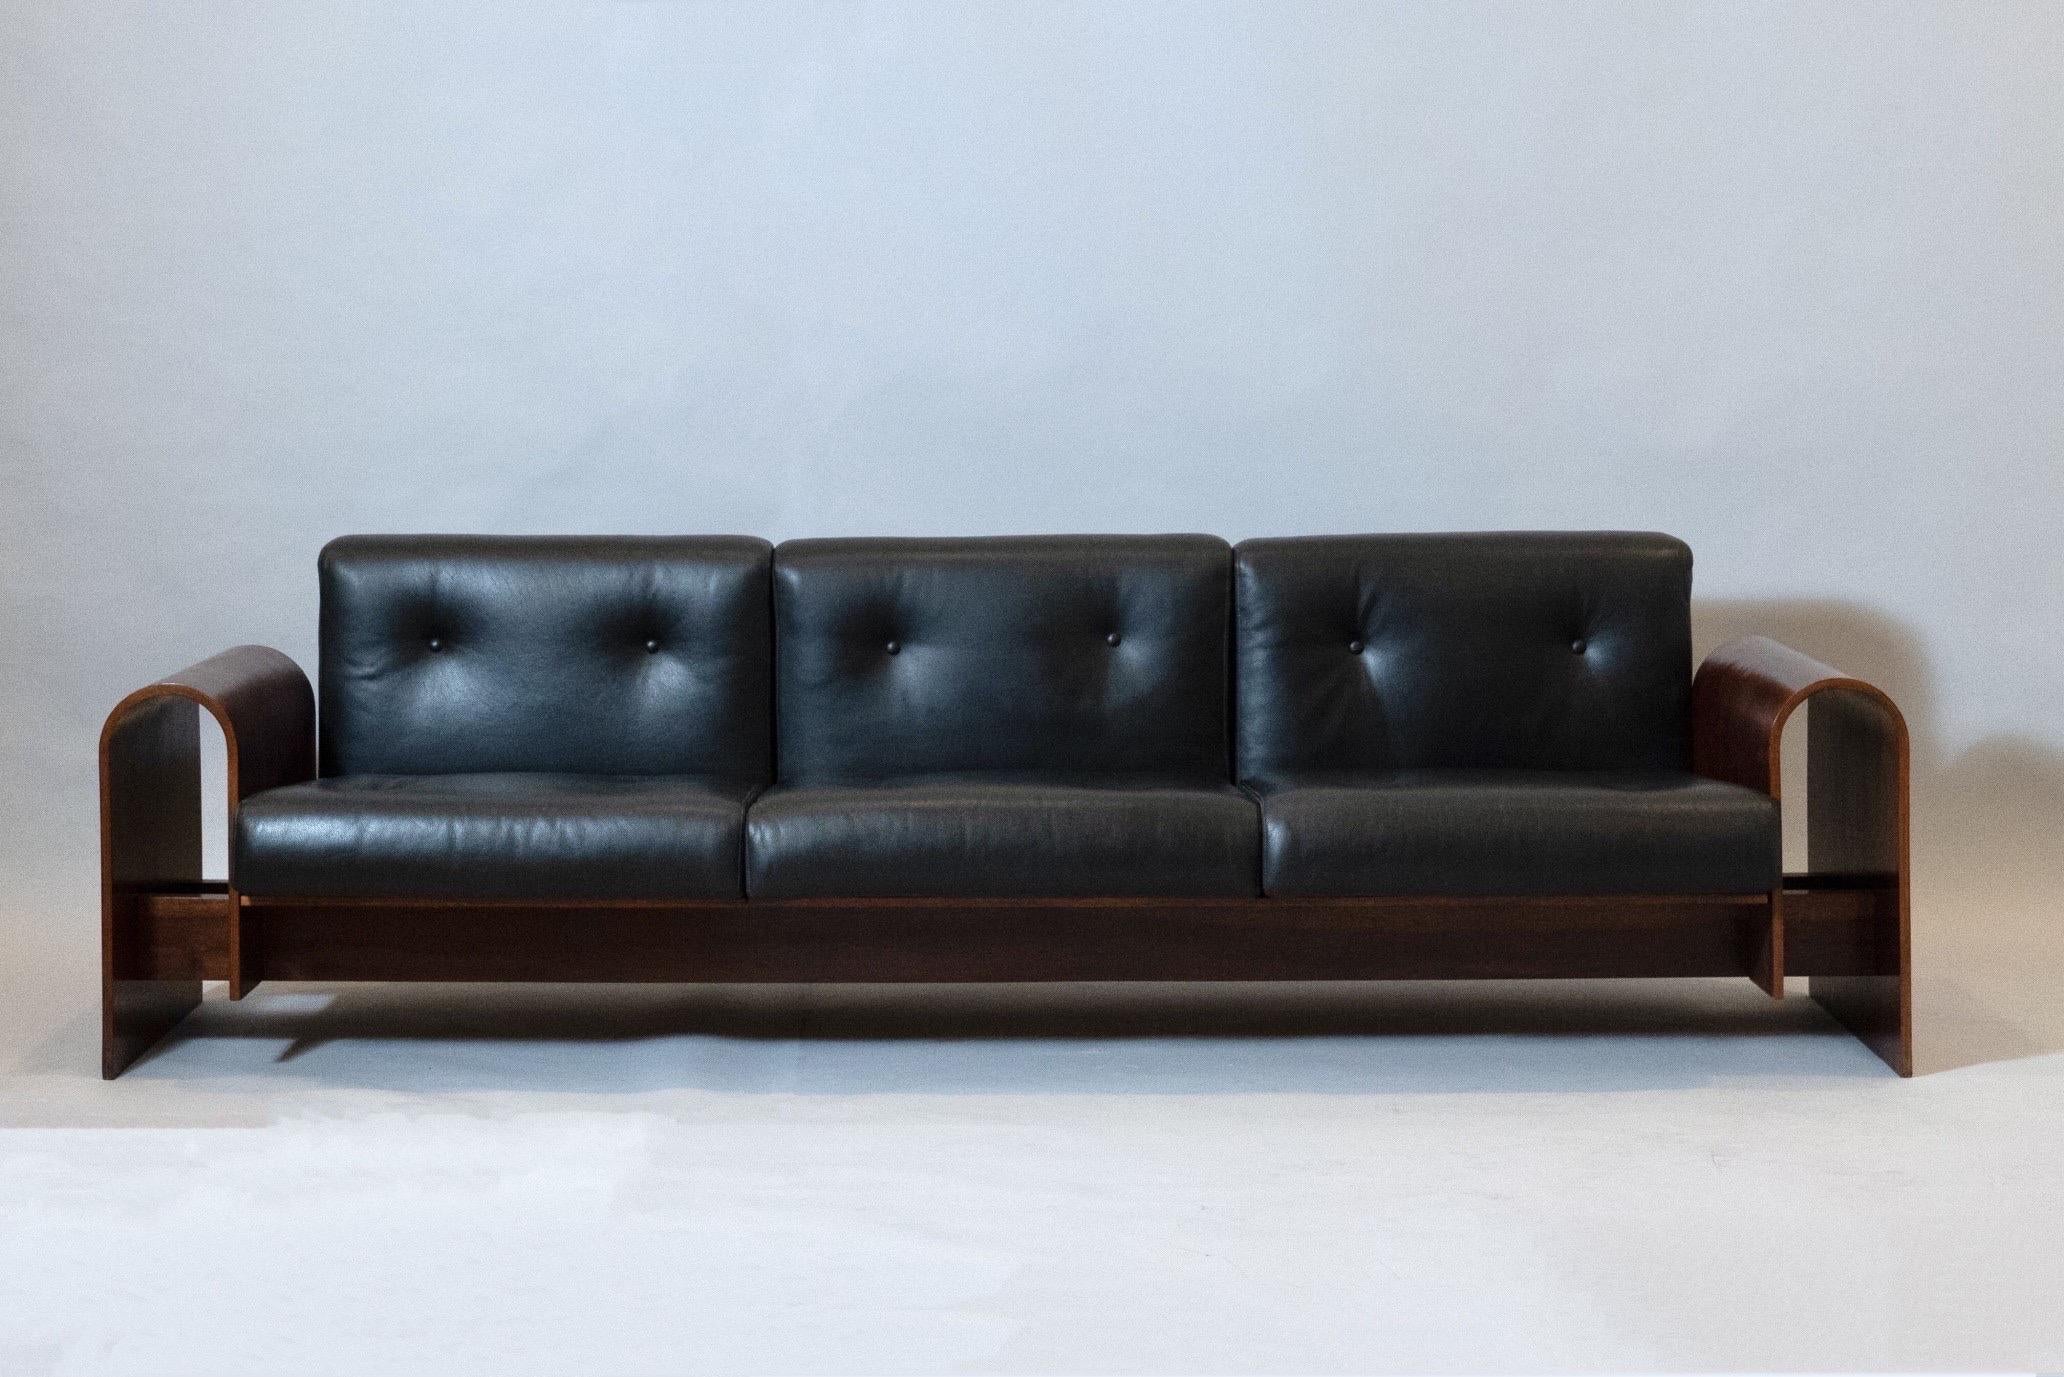 Late 20th Century Oscar Niemeyer Exceptional Sofa in Rosewood and Leather, Hotel SESC, Brazil 1990 For Sale